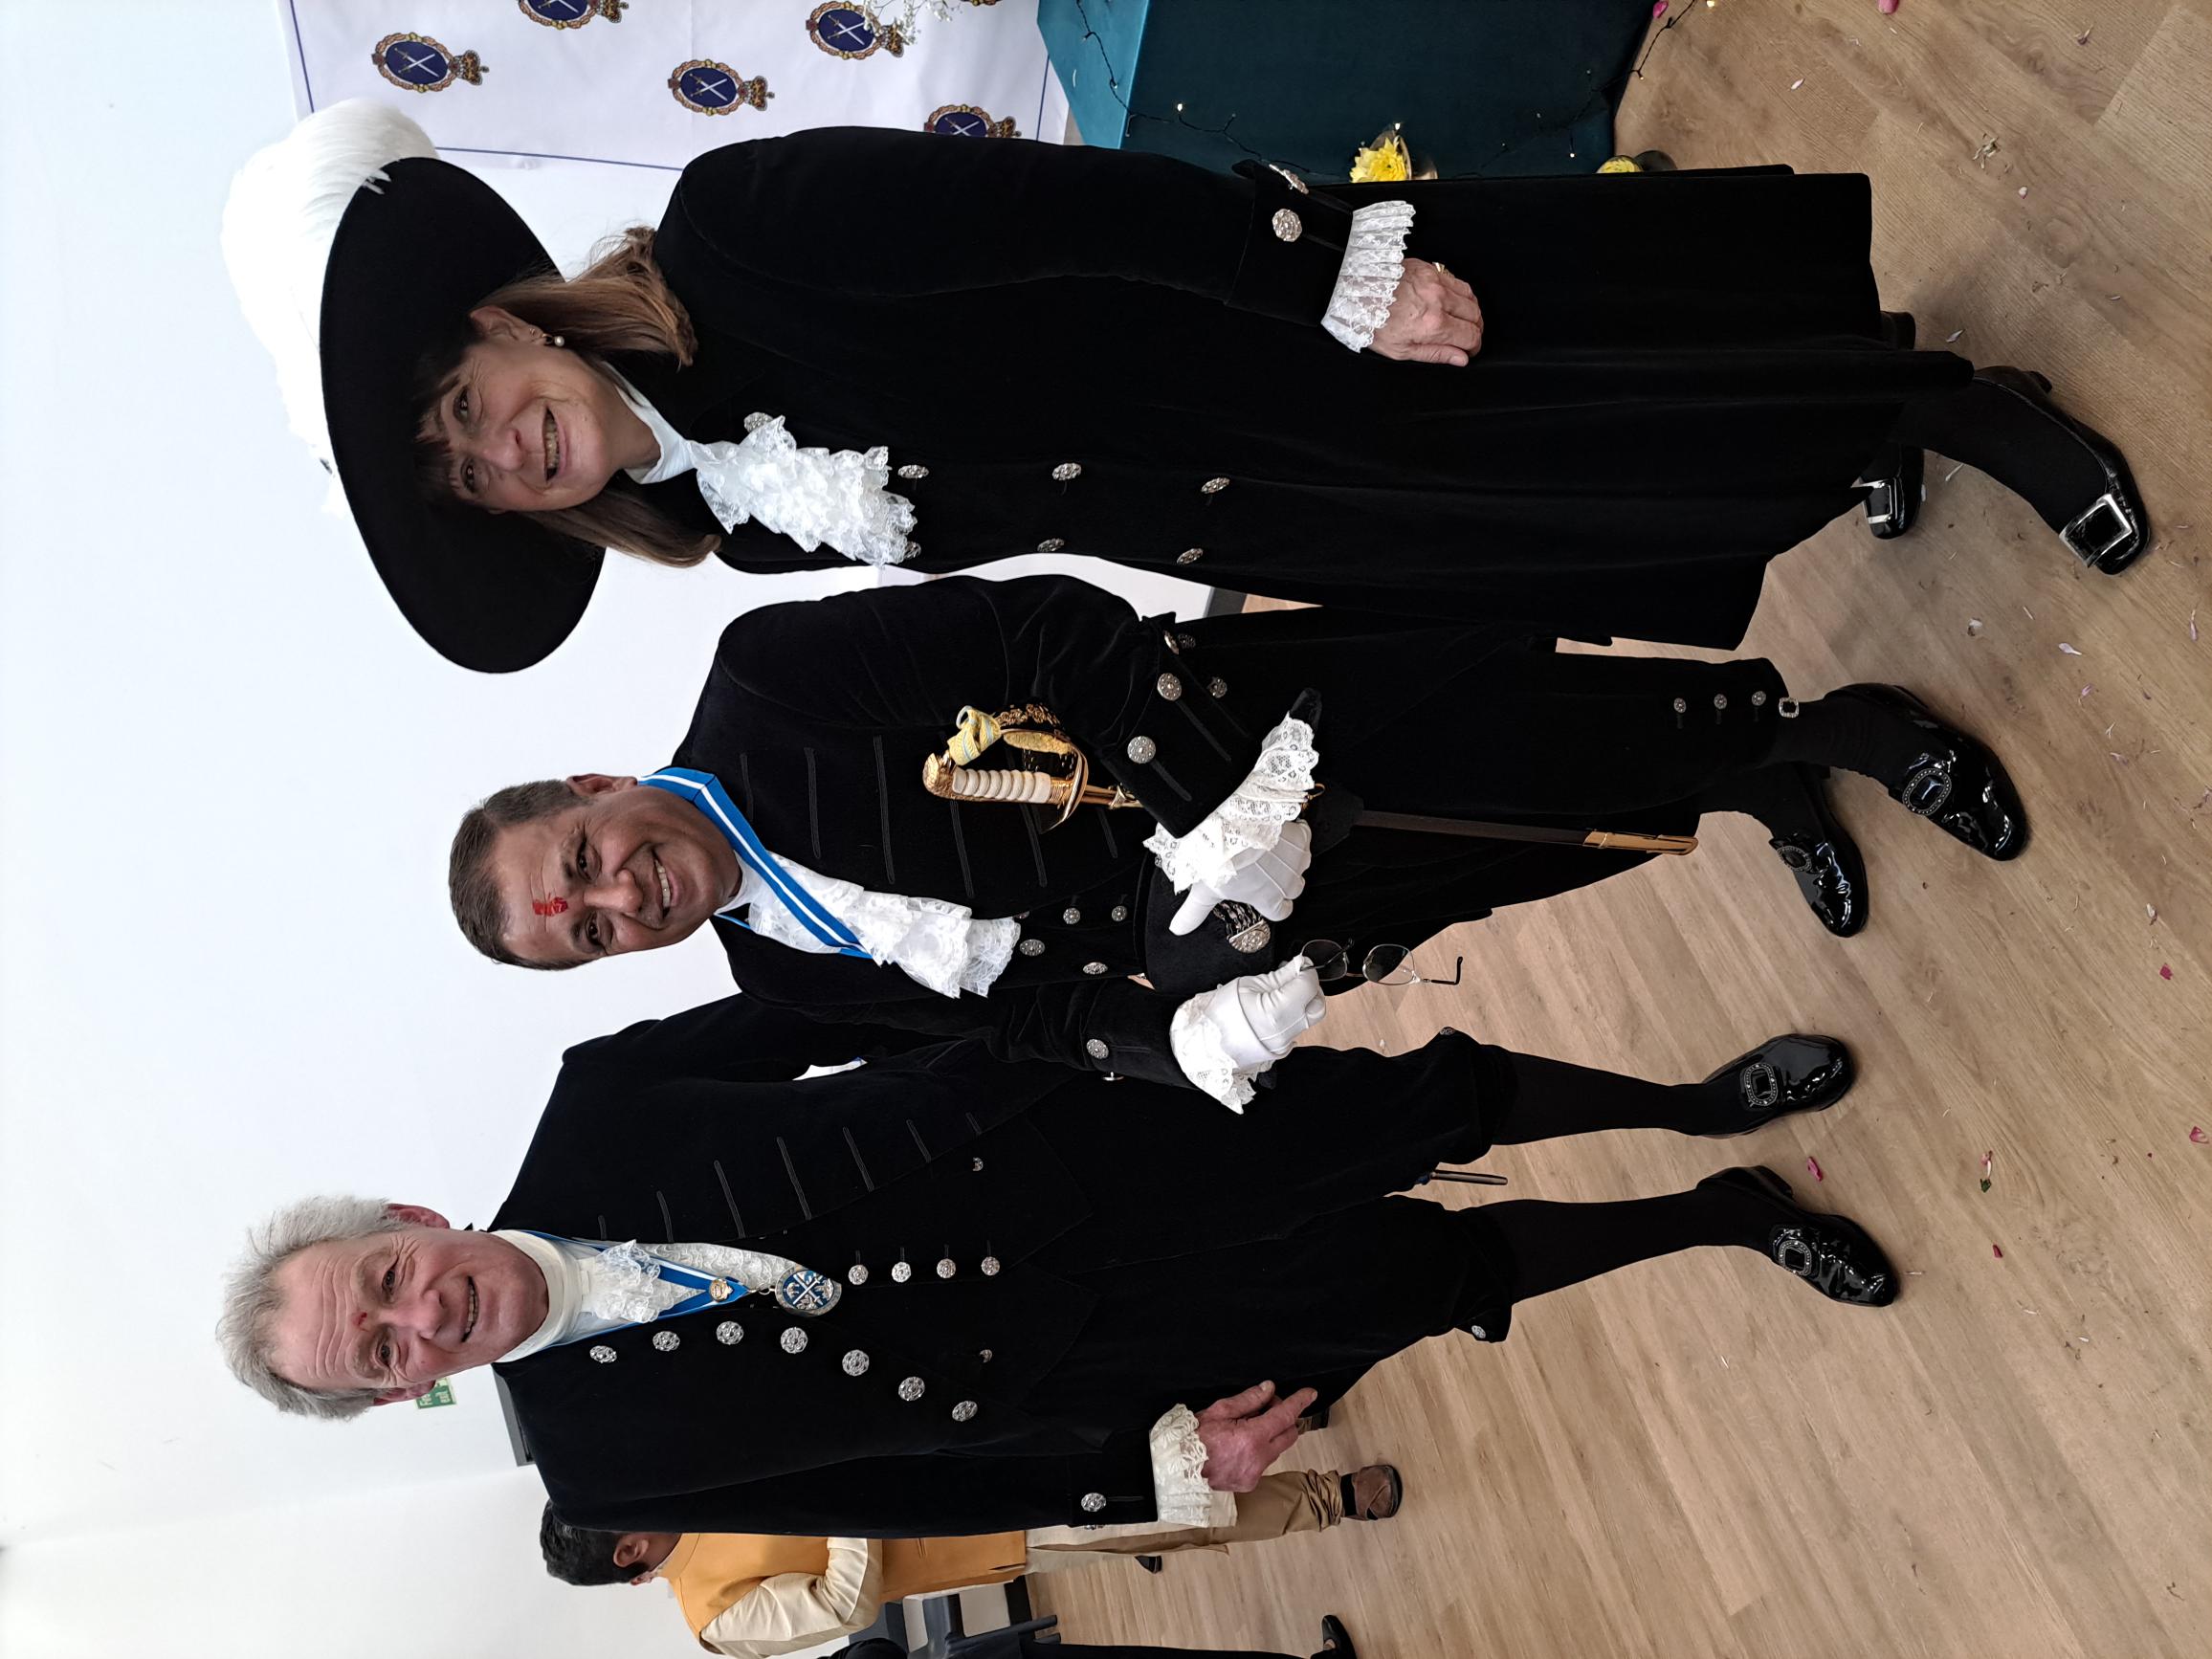 March 31st High Sheriffs of Gloucestershire, Wiltshire and Hampshire at the service to mark the start of Pradeep Bhardwaj's term for Wiltshire.